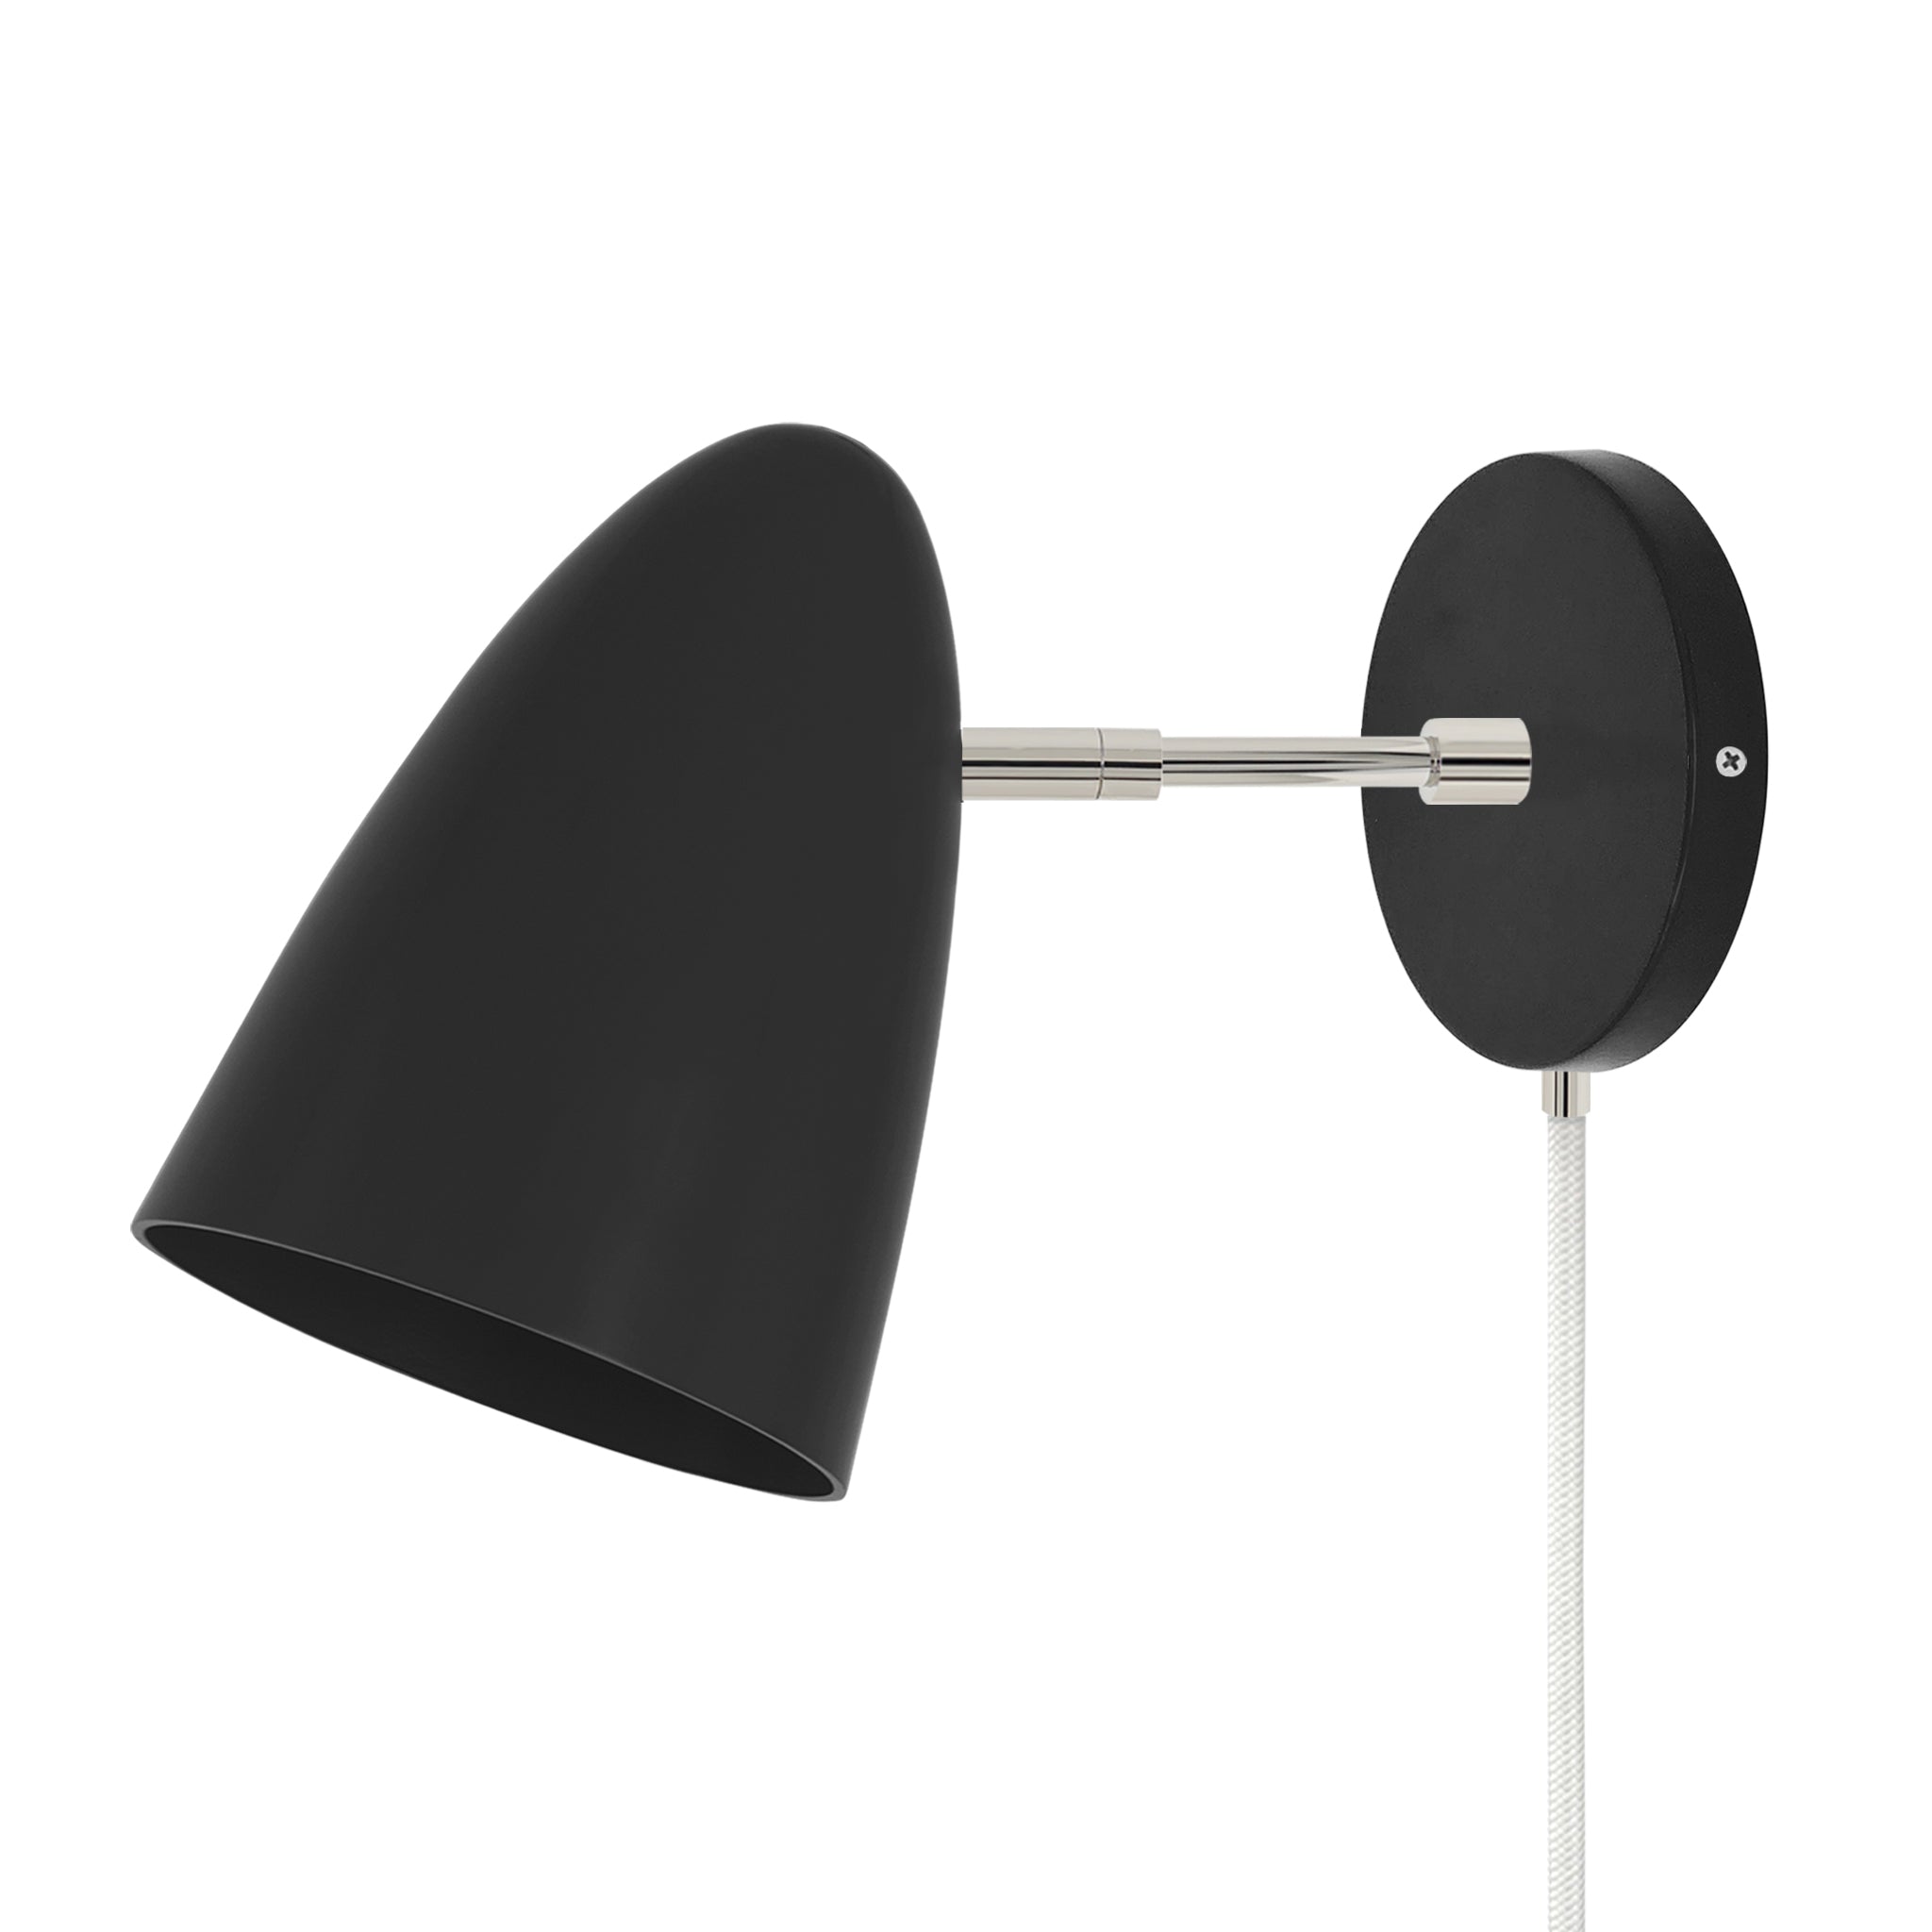 Nickel and black color Boom plug-in sconce 3" arm Dutton Brown lighting